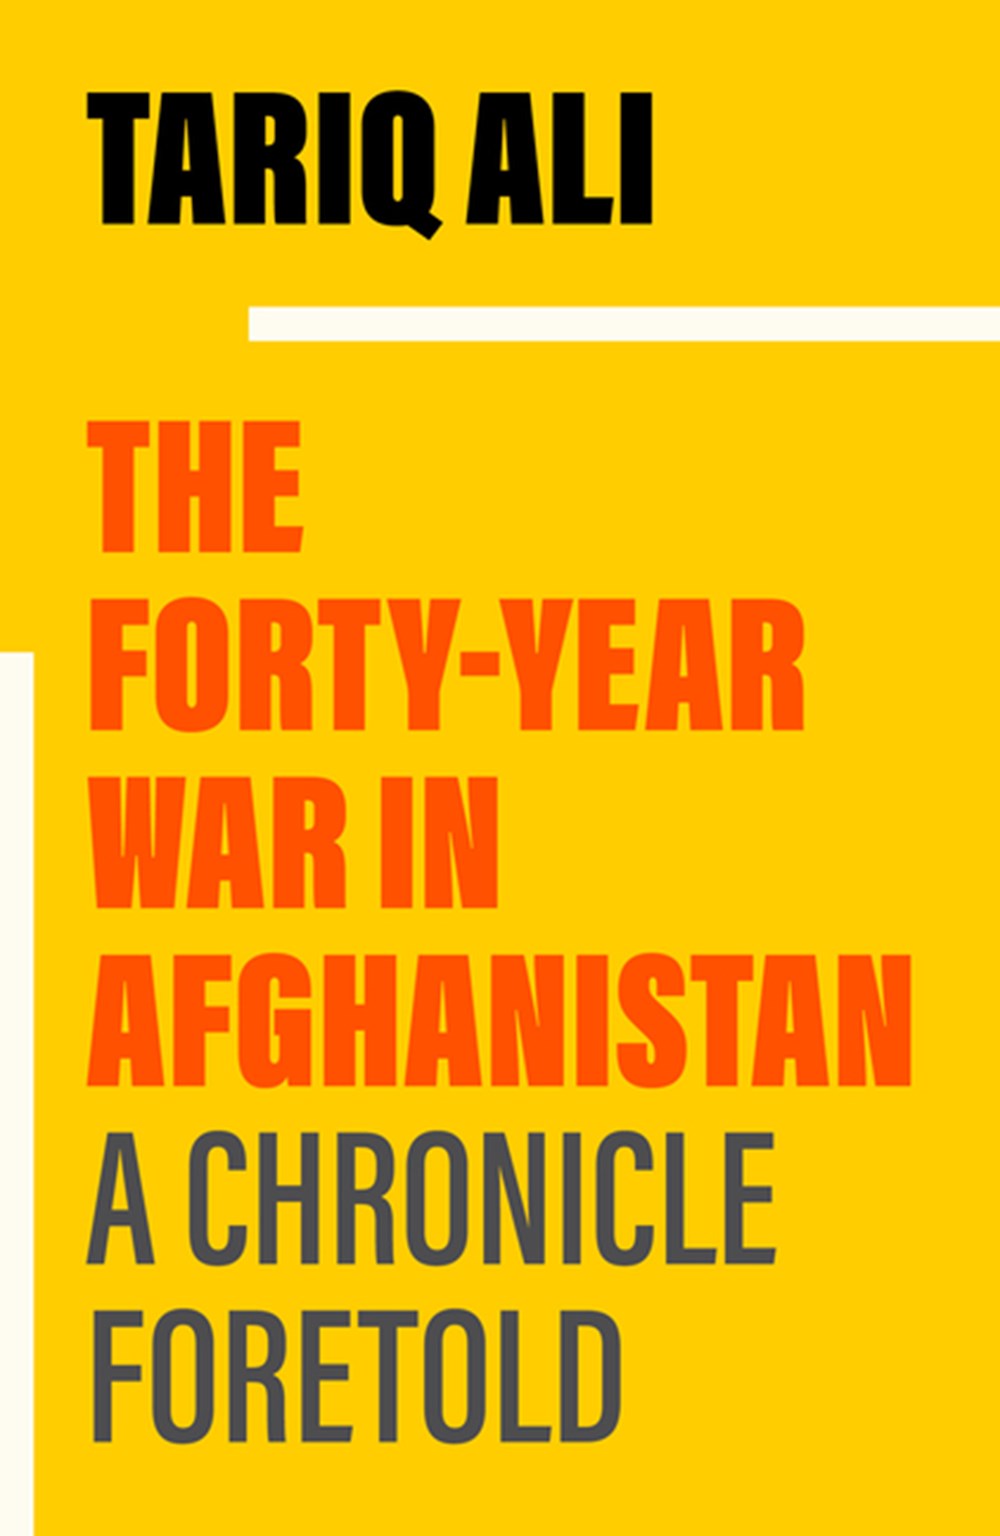 Forty-Year War in Afghanistan: A Chronicle Foretold